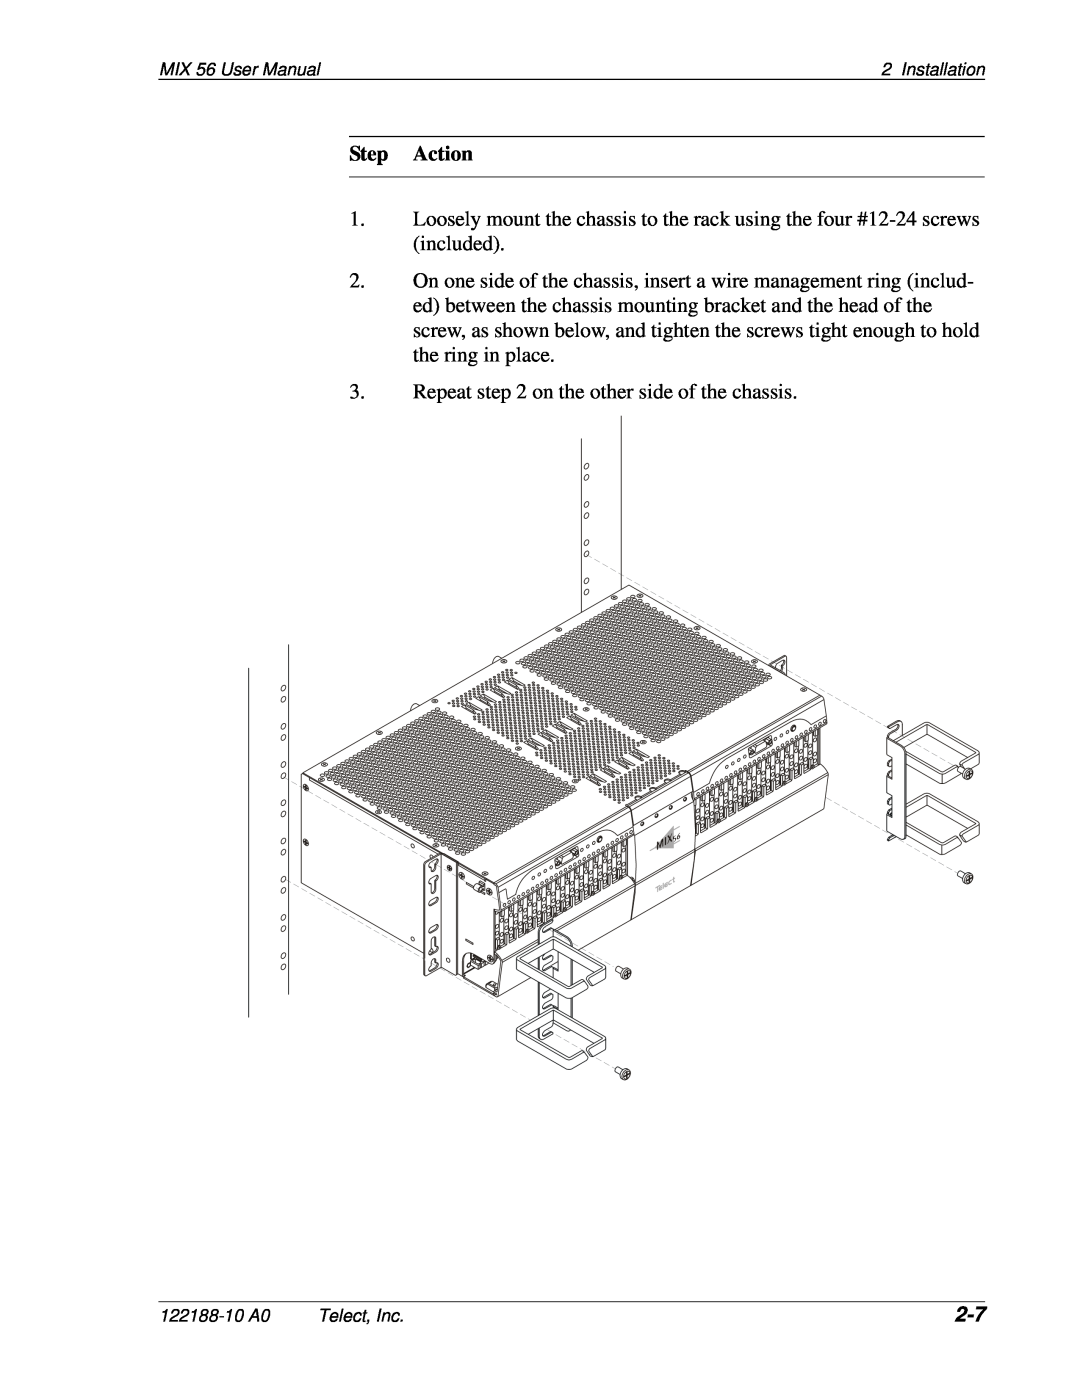 Telect MIX 56 user manual Step Action, Repeat on the other side of the chassis 